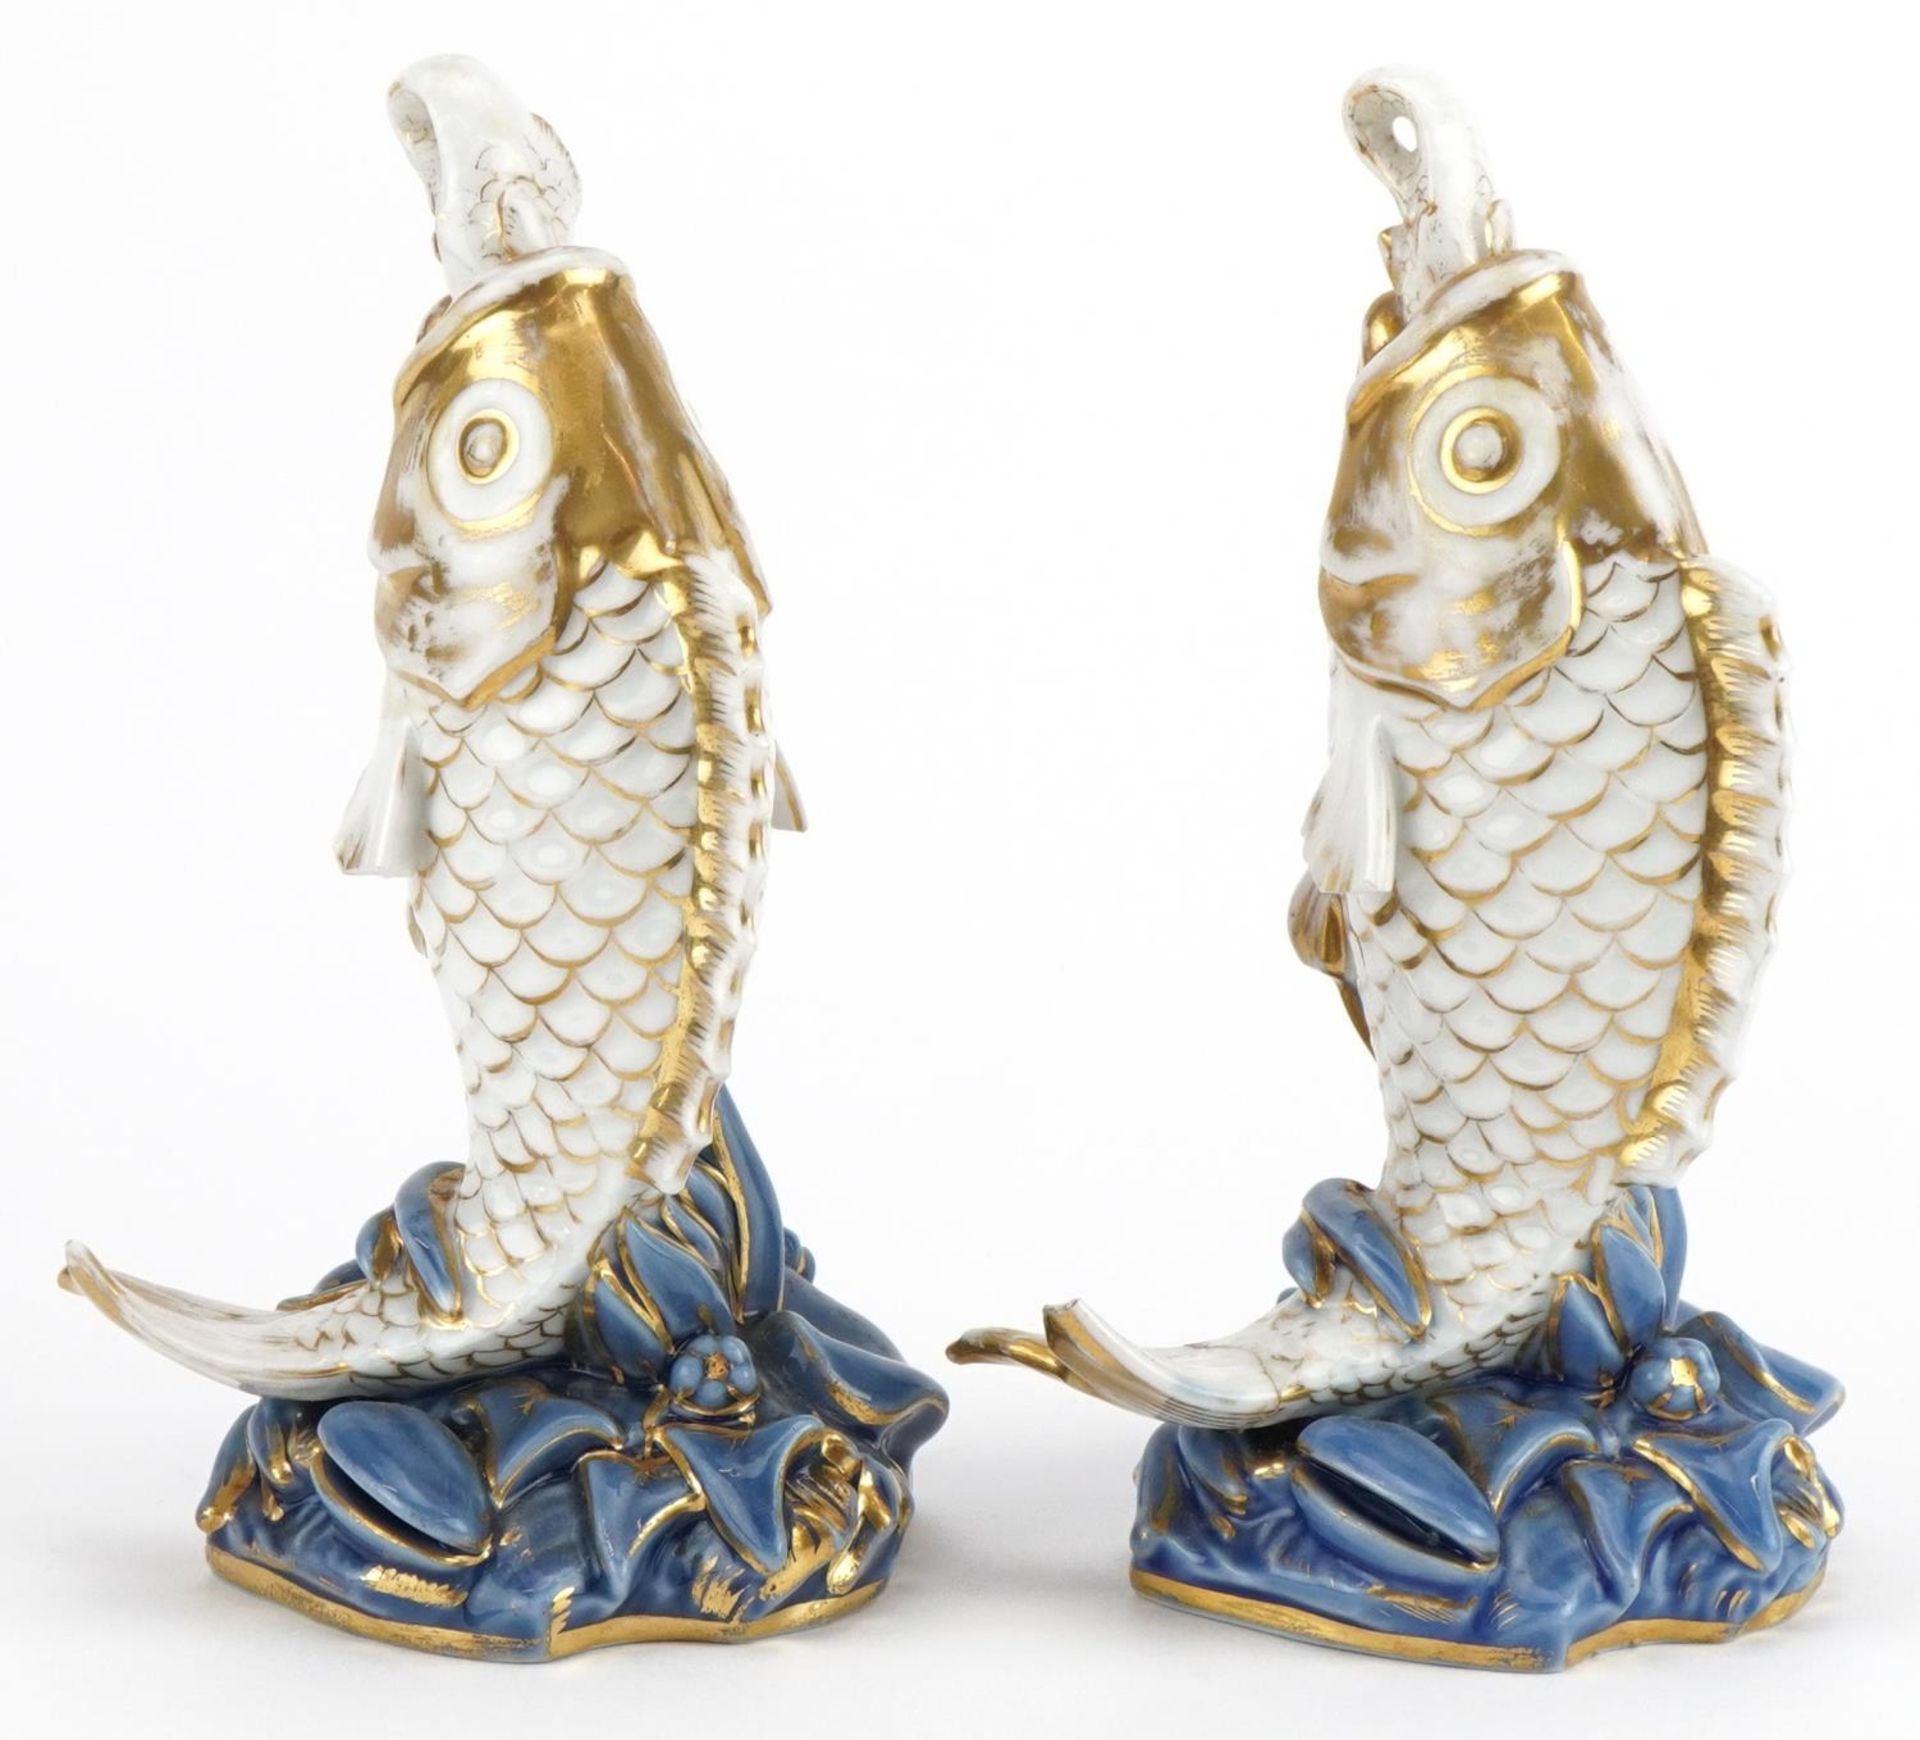 Pair of 19th century continental porcelain scent bottles with stoppers in the form of fish, each - Image 2 of 4